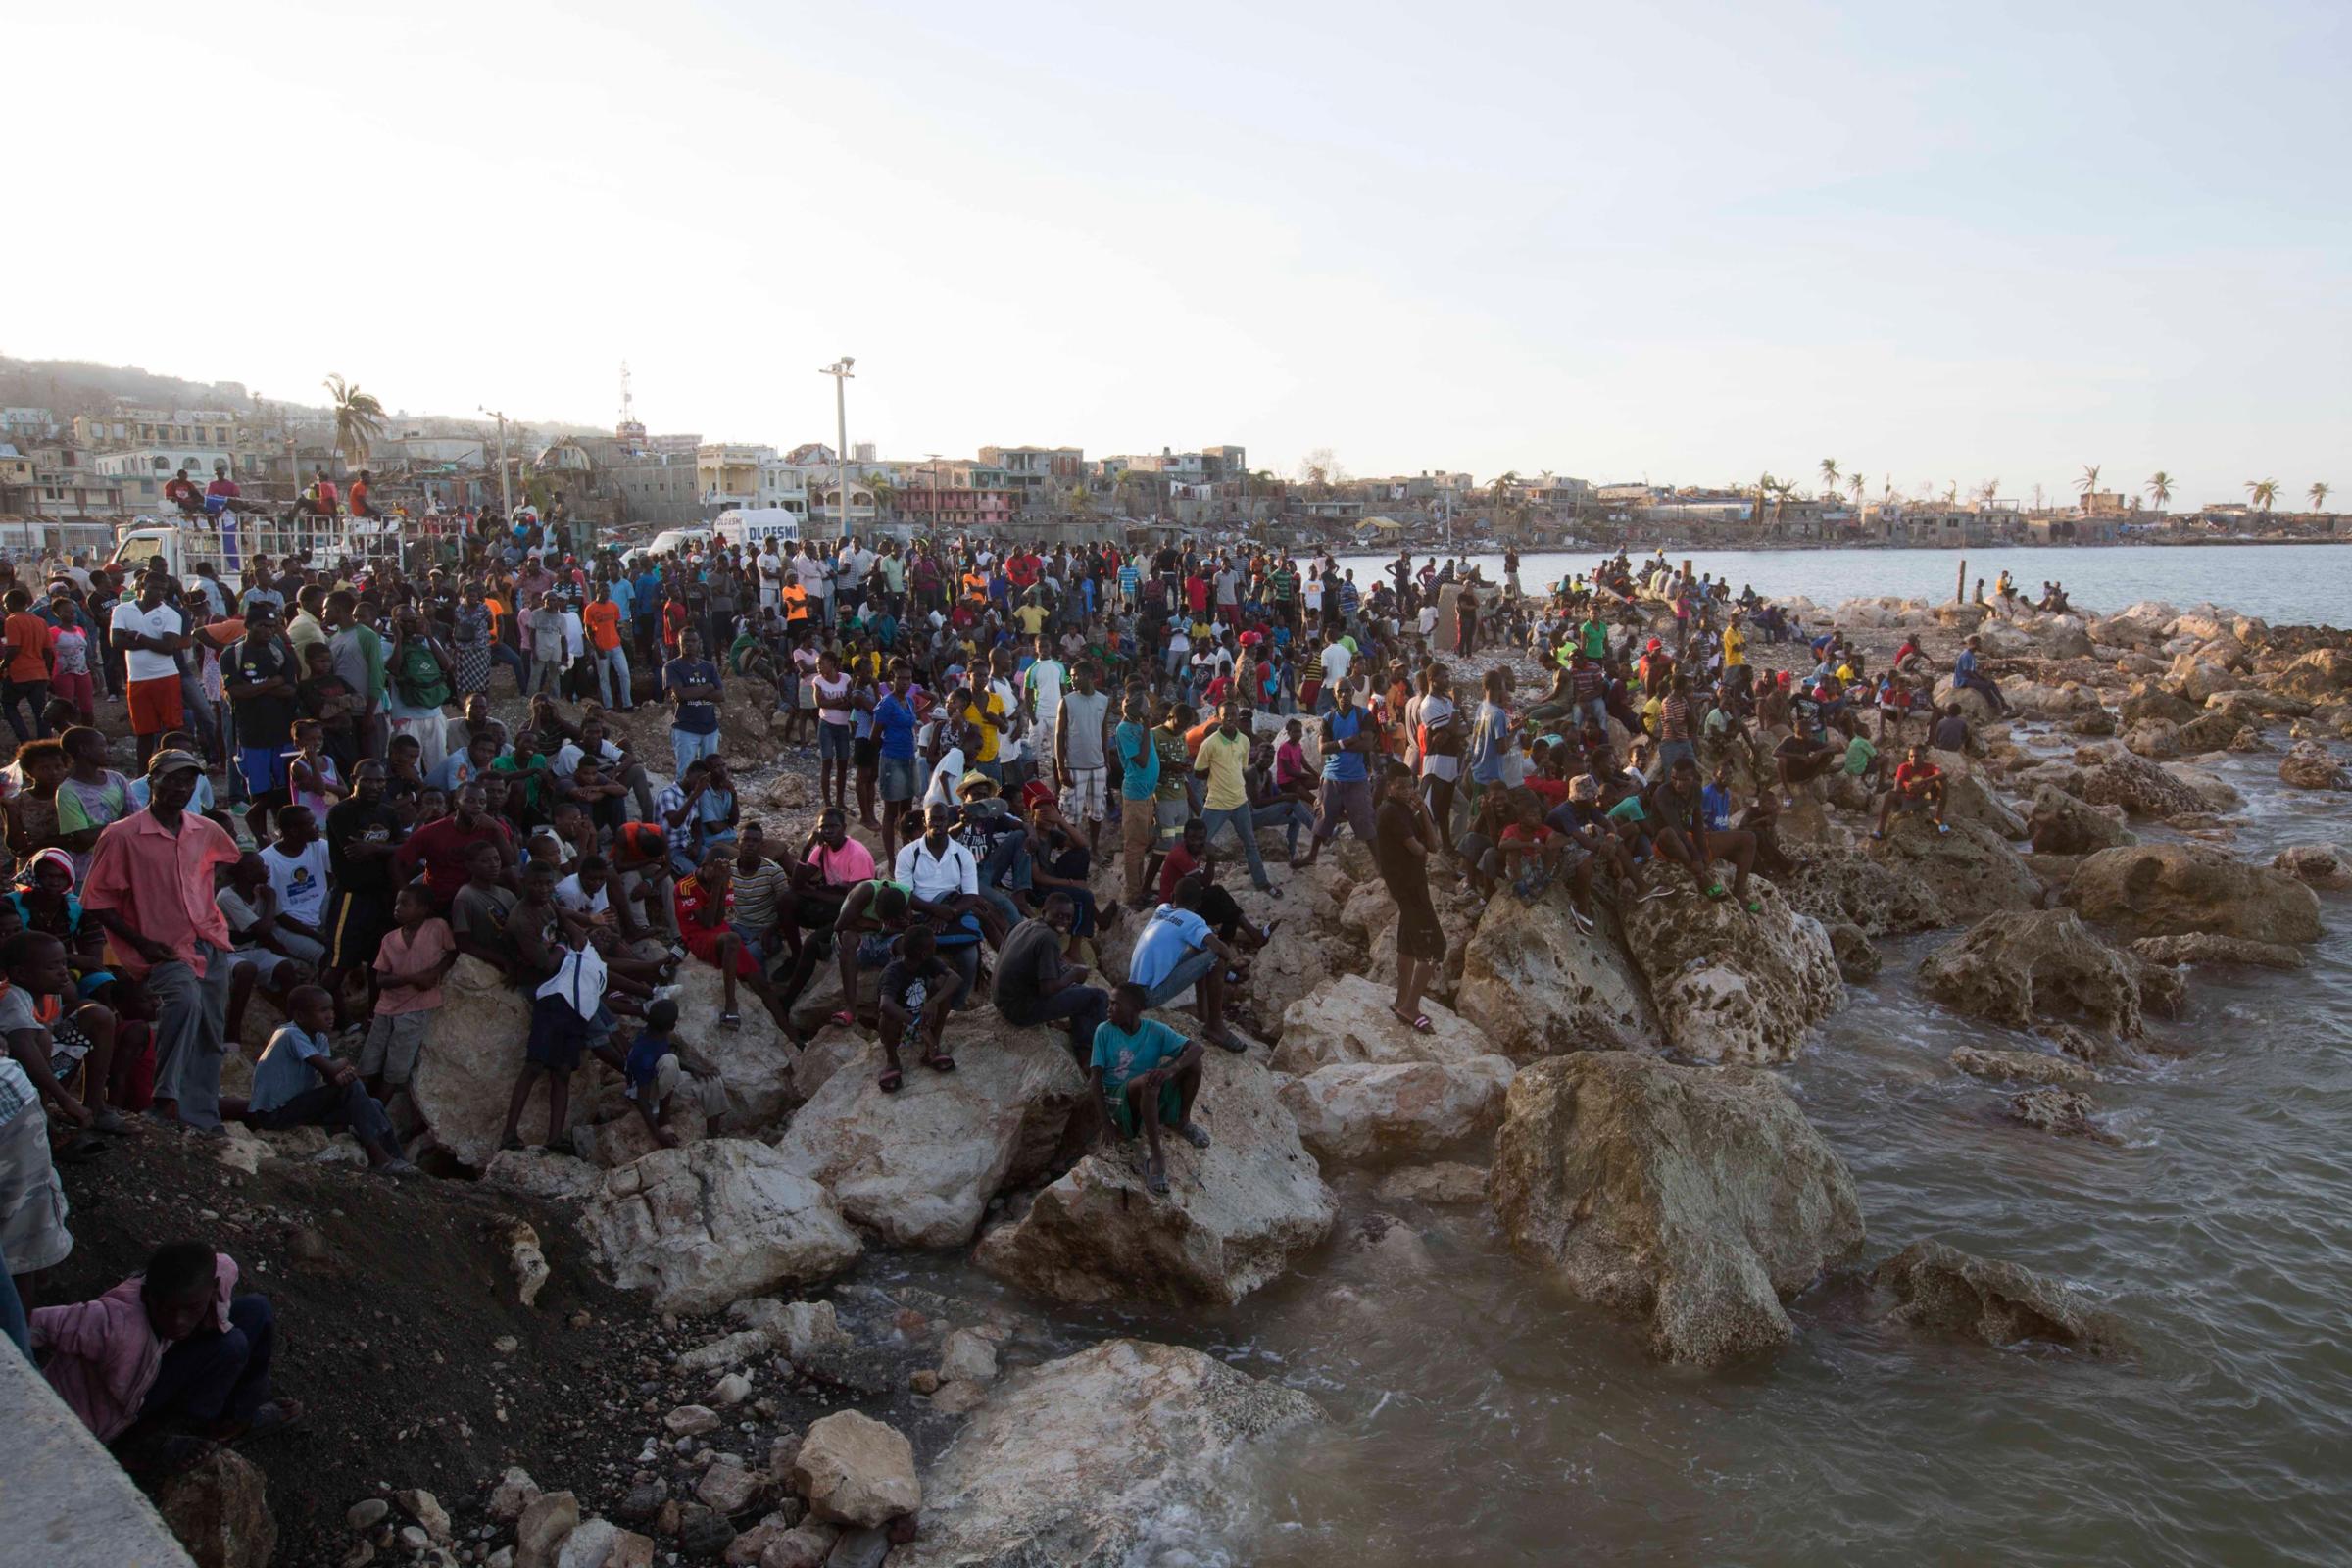 Residents wait on the shore as a boat with water and food from the "Mission of Hope" charity arrives after Hurricane Matthew swept through Jeremie, Haiti, Saturday Oct. 8, 2016. Jeremie appears to be the epicenter of the country's growing humanitarian crisis in the wake of the storm. (AP Photo/Dieu Nalio Chery)